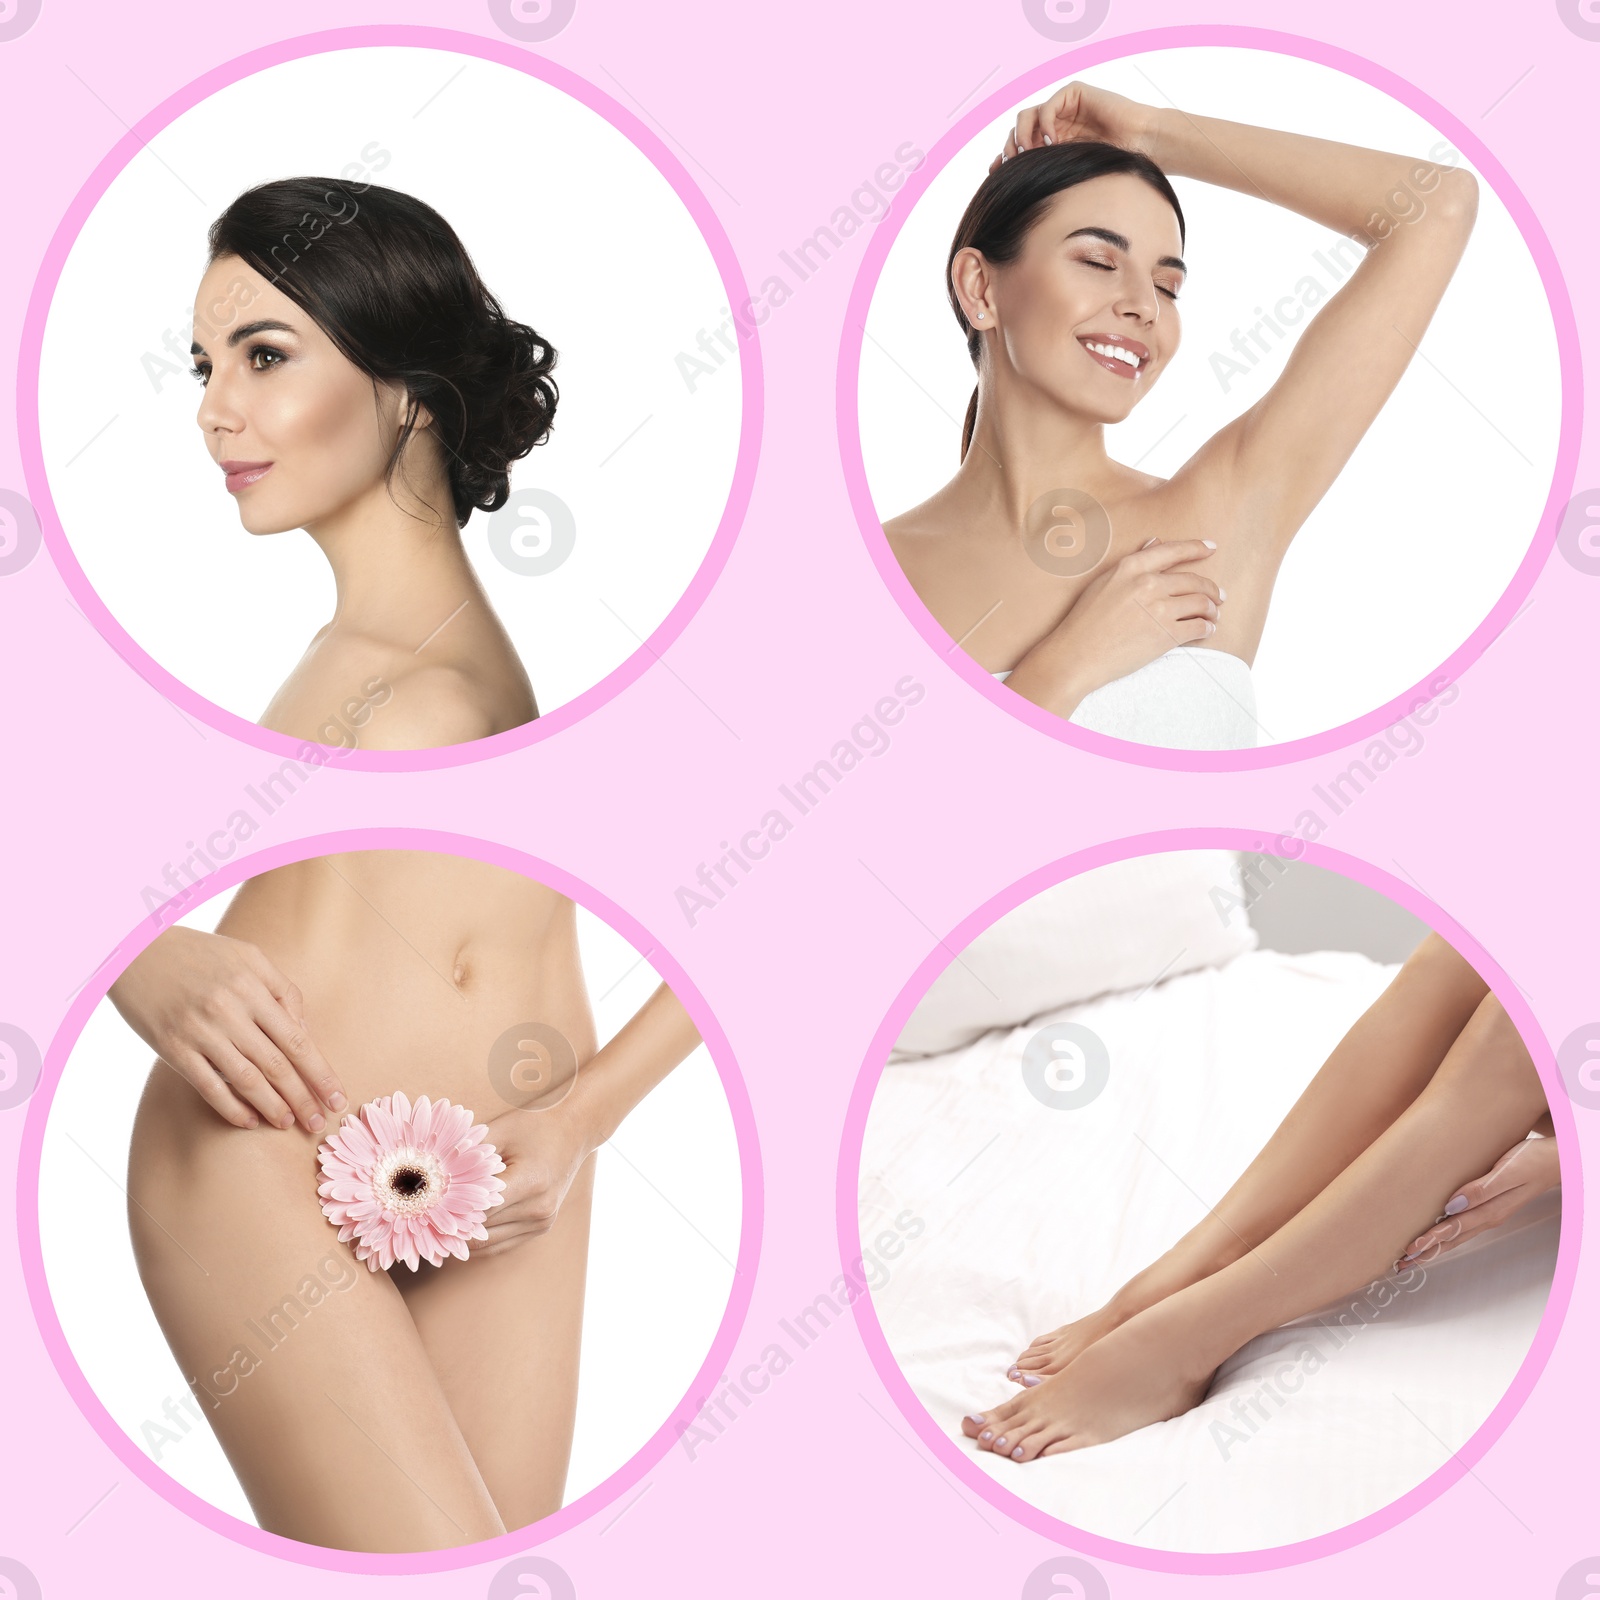 Image of Collage with photos of woman showing smooth skin after epilation